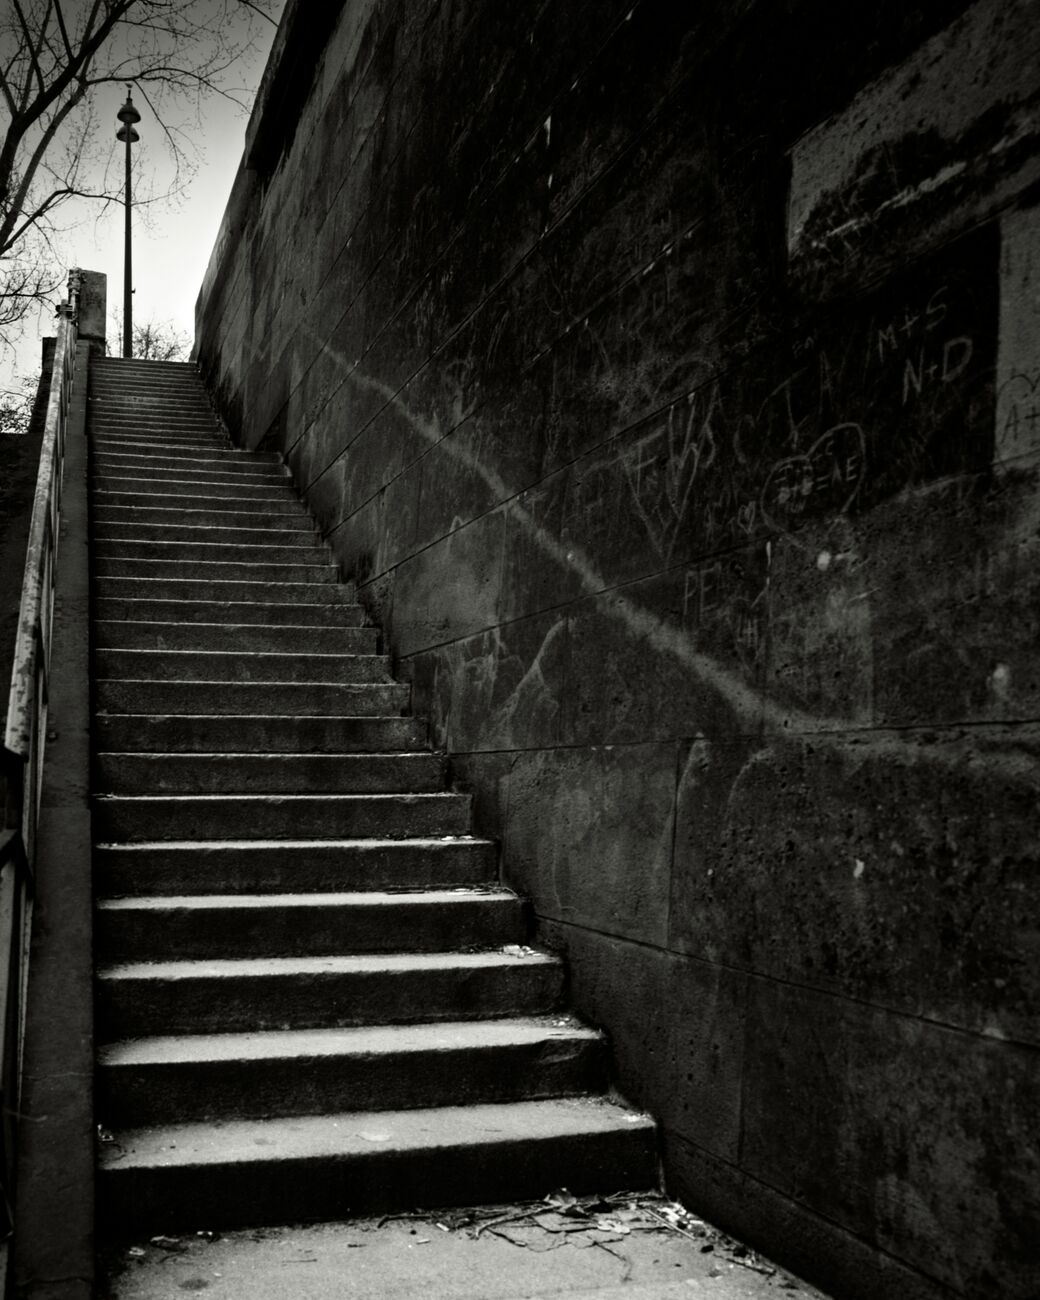 Quay Stairs, Etude 2, Port Debilly, Paris, France. February 2022. Ref-11664 - Denis Olivier Photography